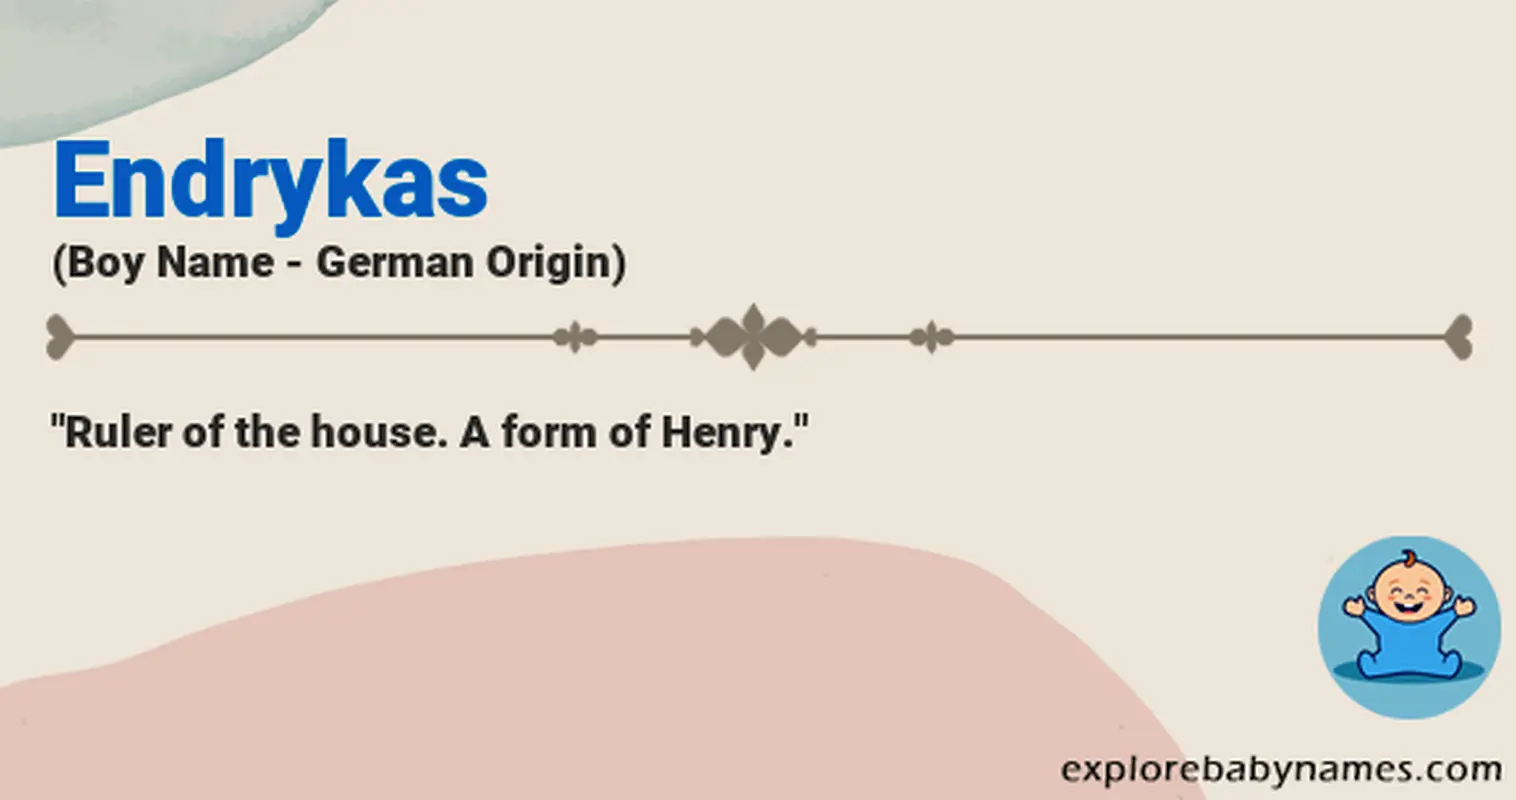 Meaning of Endrykas